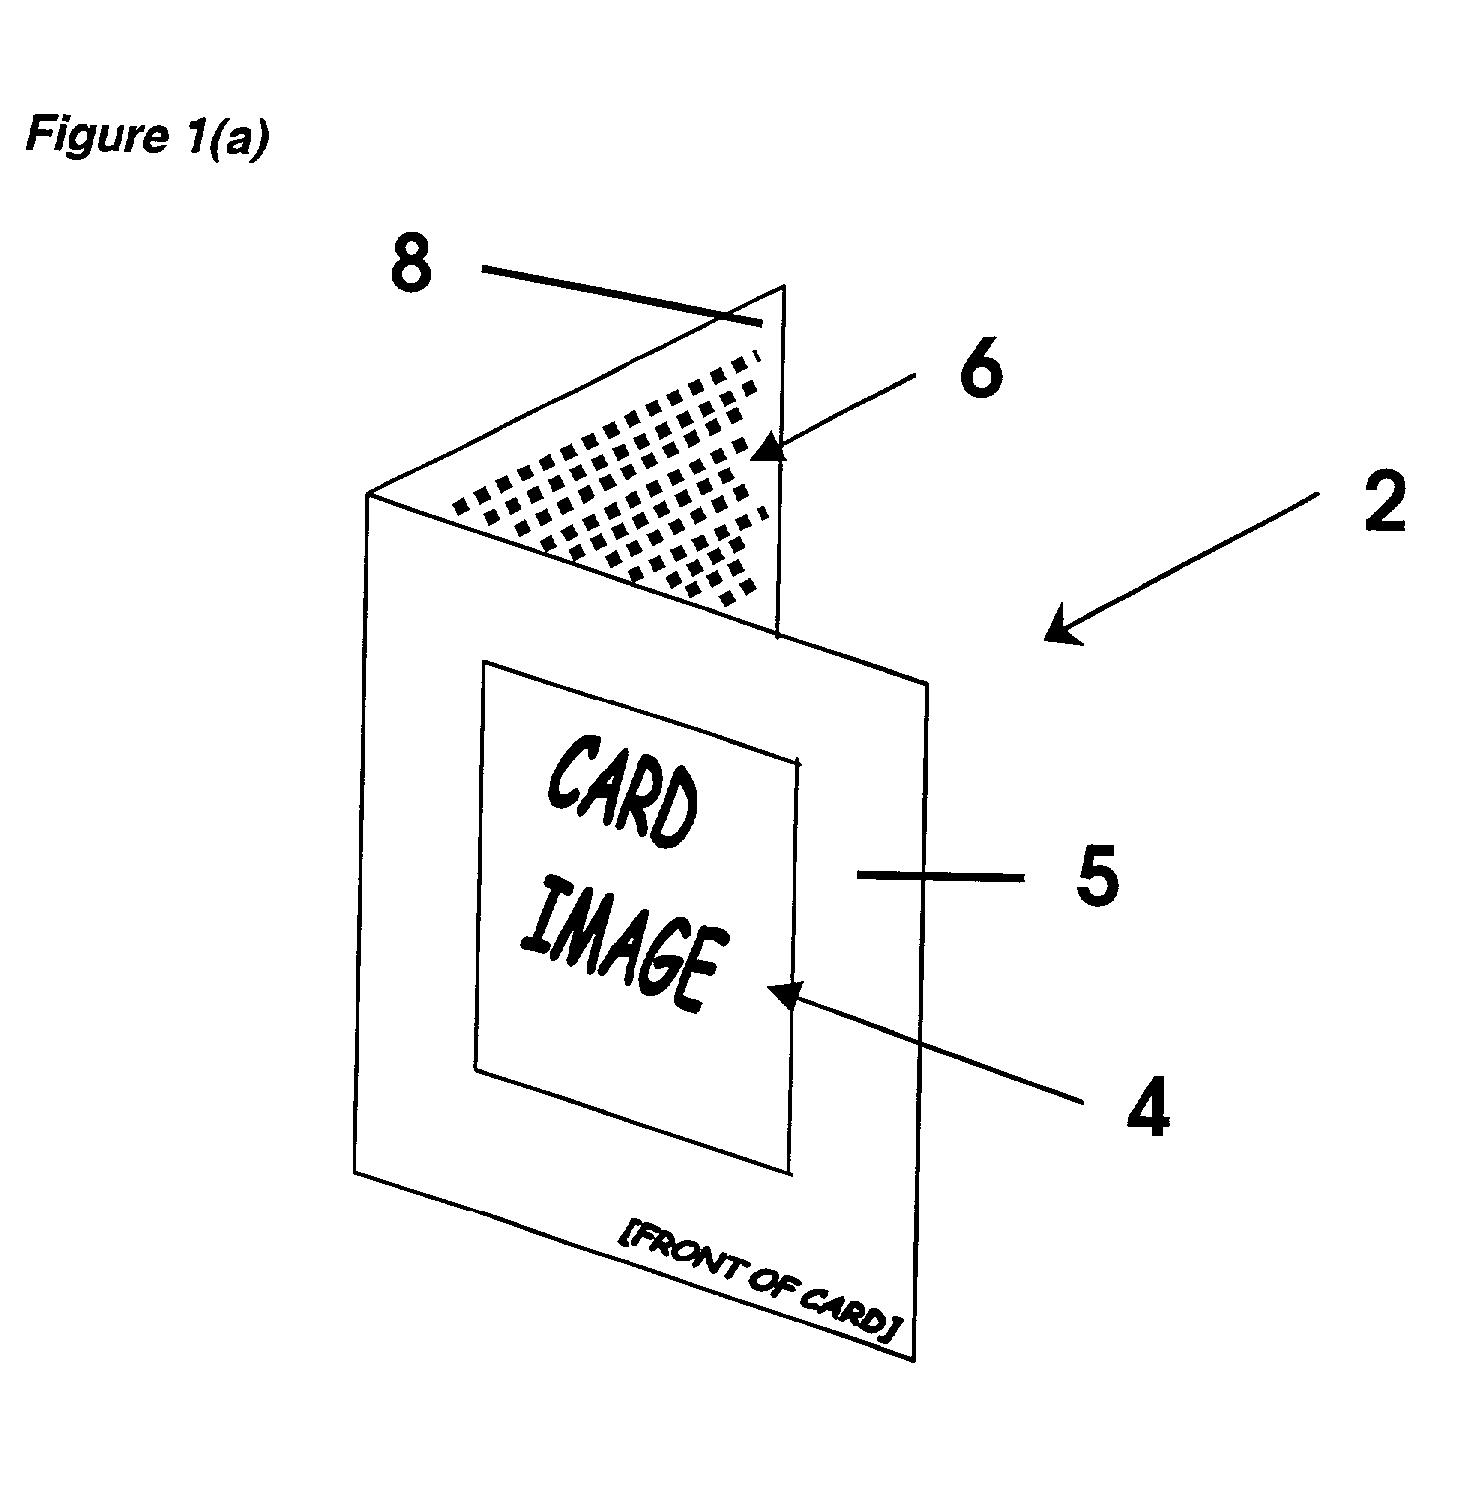 Method for online personalization of greeting cards